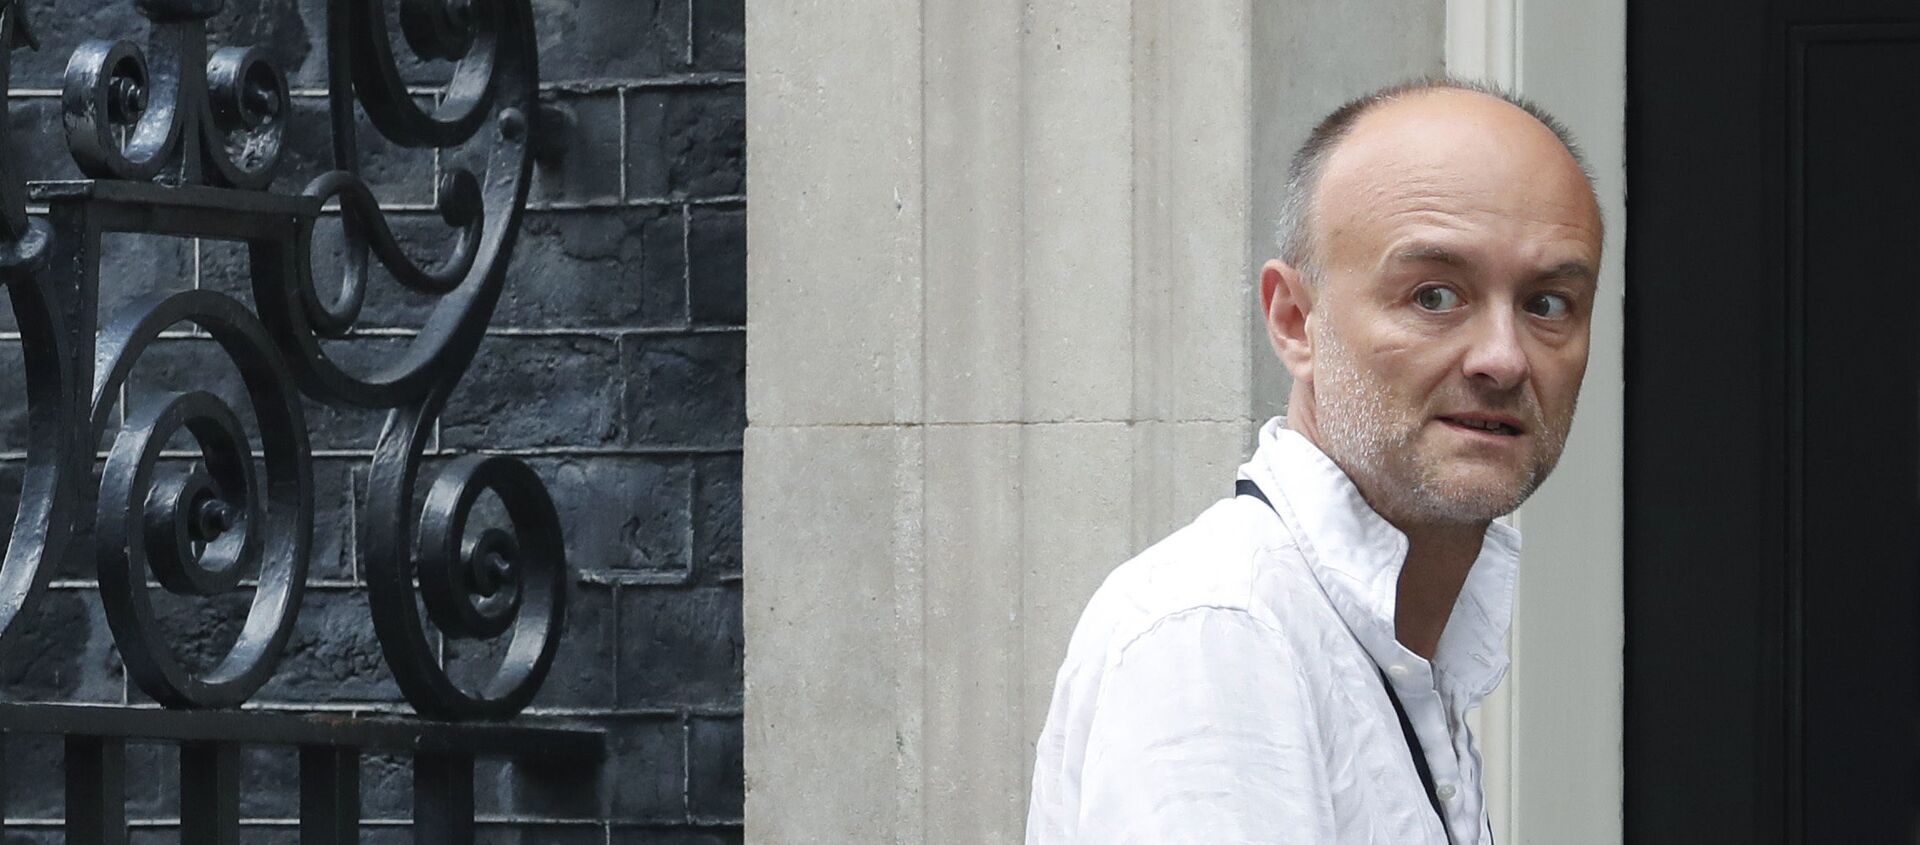 Dominic Cummings, a British political strategist and special adviser to Prime Minister Boris Johnson, enters 10 Downing Street in London, Tuesday, 30 July 2019. (AP Photo/Alastair Grant) - Sputnik International, 1920, 23.04.2021